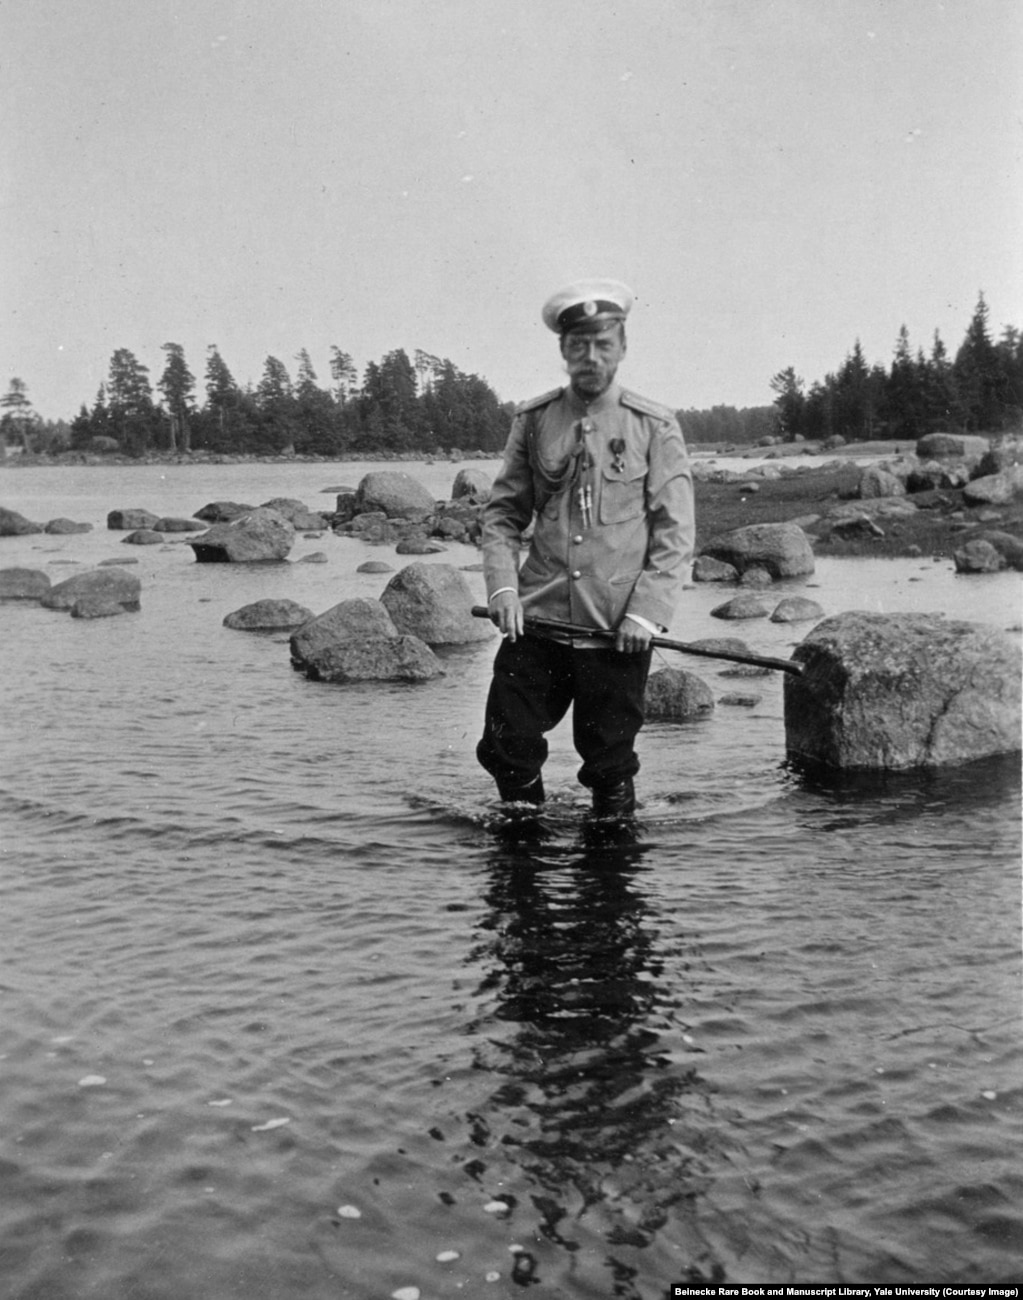 Tsar Nicholas II wading on the rocky shore of Finland. After the early death of his father, he confided to a friend, &quot;I am not yet ready to be tsar. I know nothing of the business of ruling.&quot;